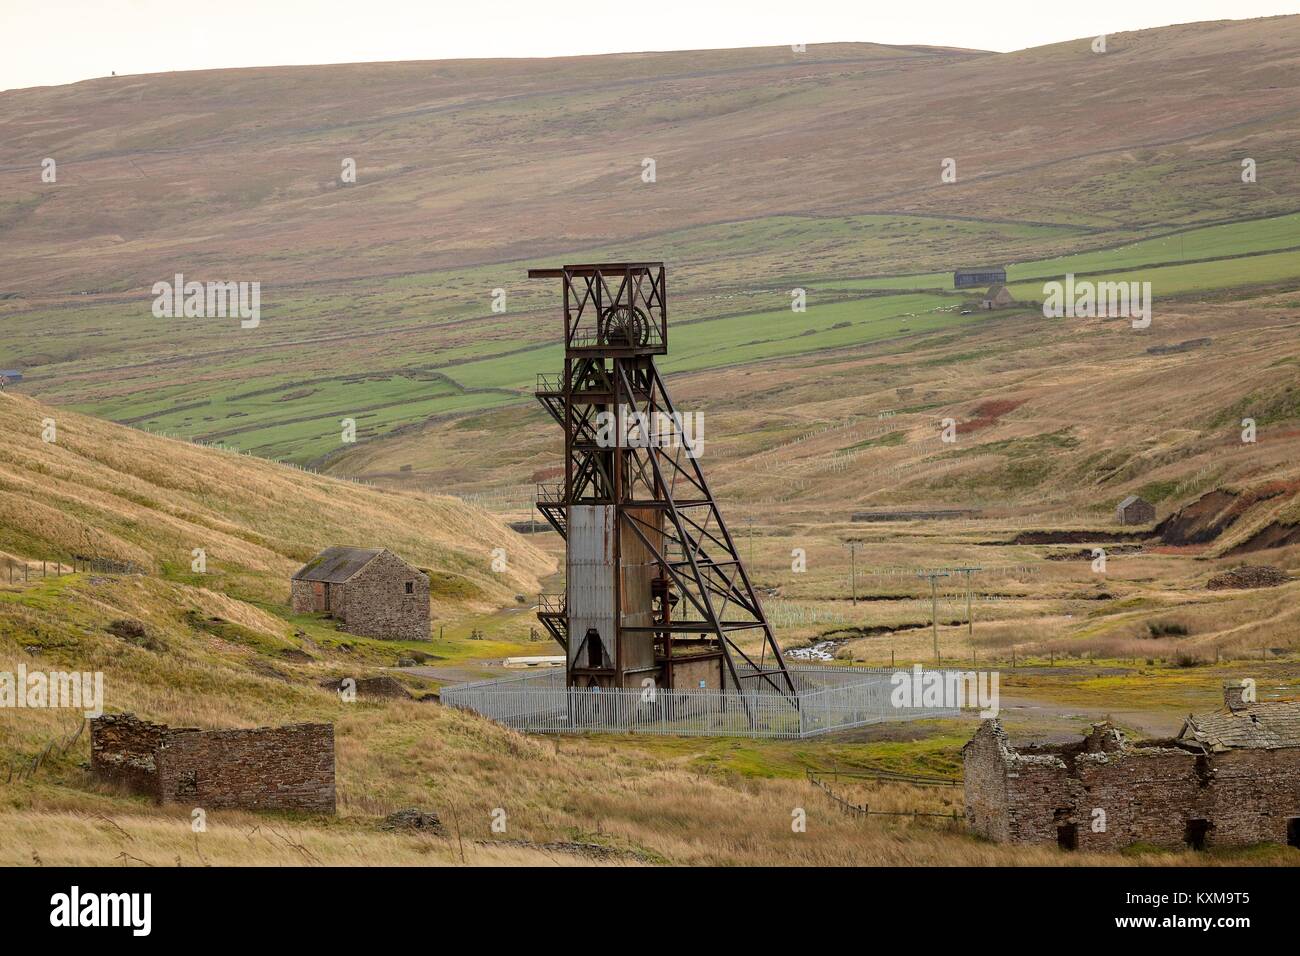 Disused Pithead of Grove Rake Mine buildings, Rookhope District, Weardale, North Pennines, County Durham, England, United Kingdom, Europe. Stock Photo